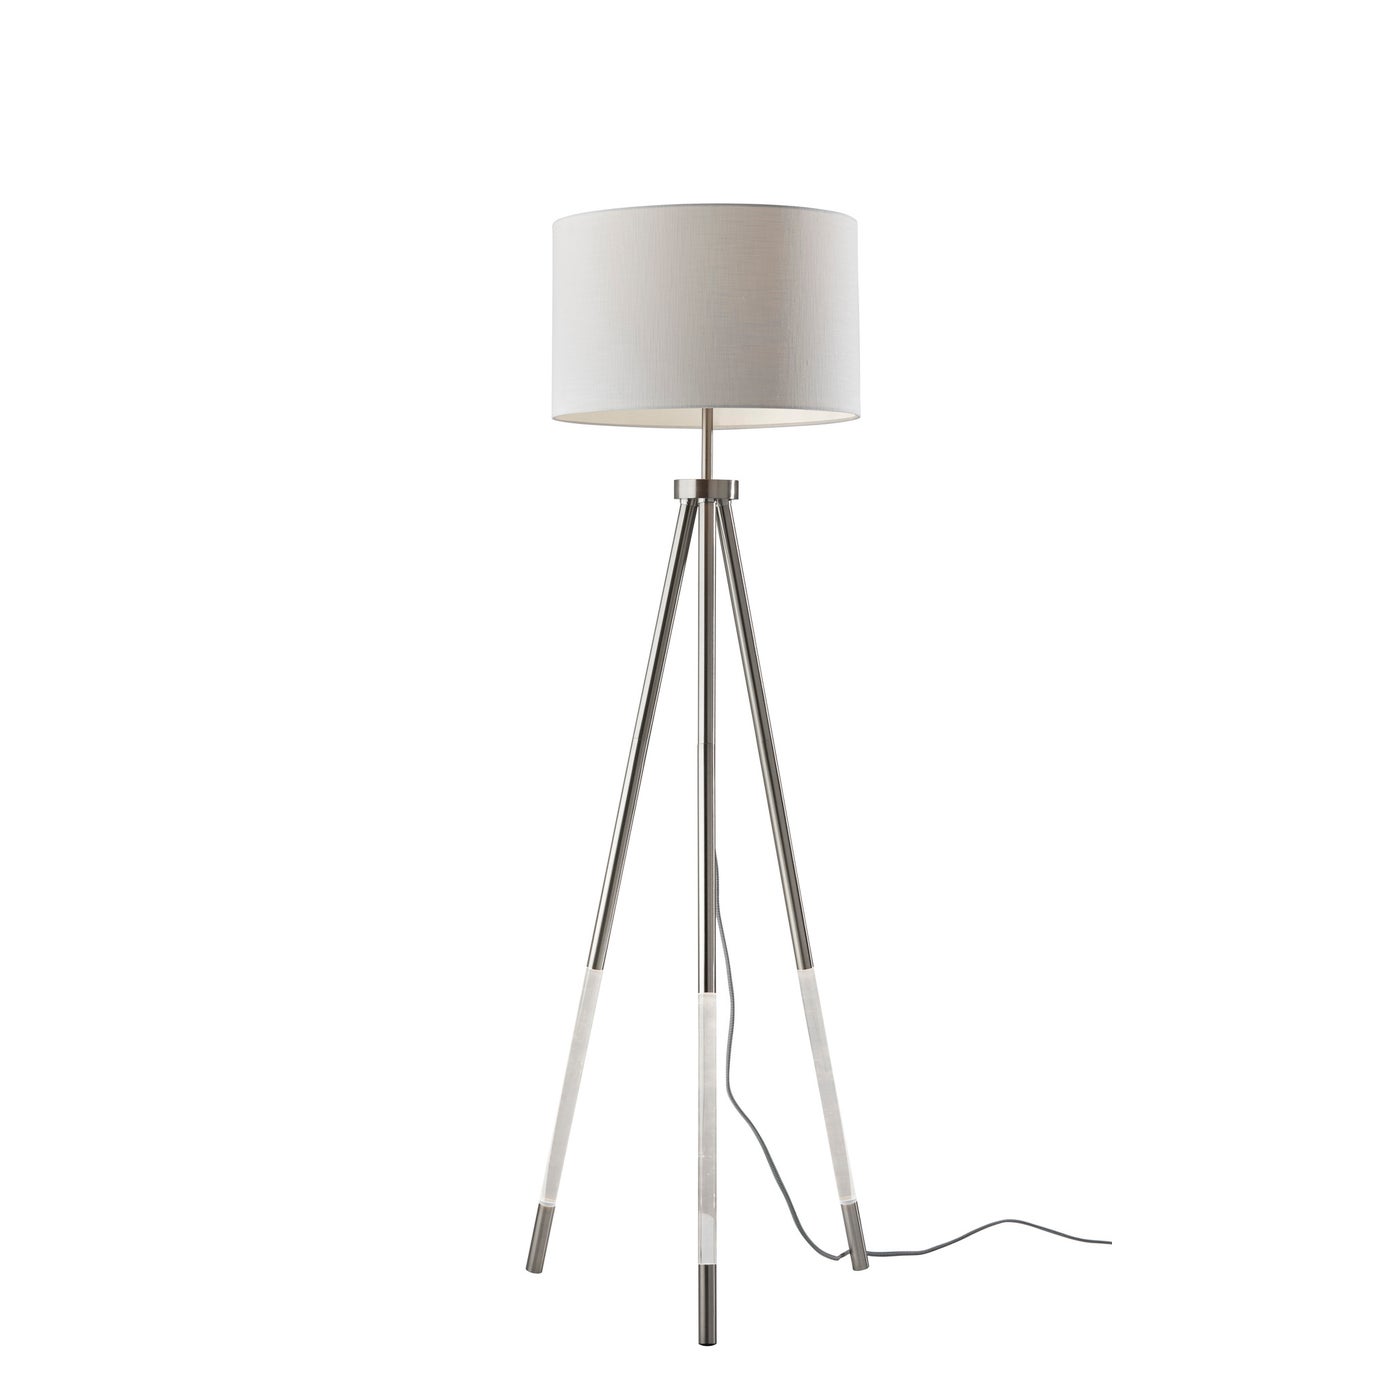 Adesso Home - 3549-22 - Floor Lamp - Della - Brushed Steel W. Clear Acrylic Light Up Legs